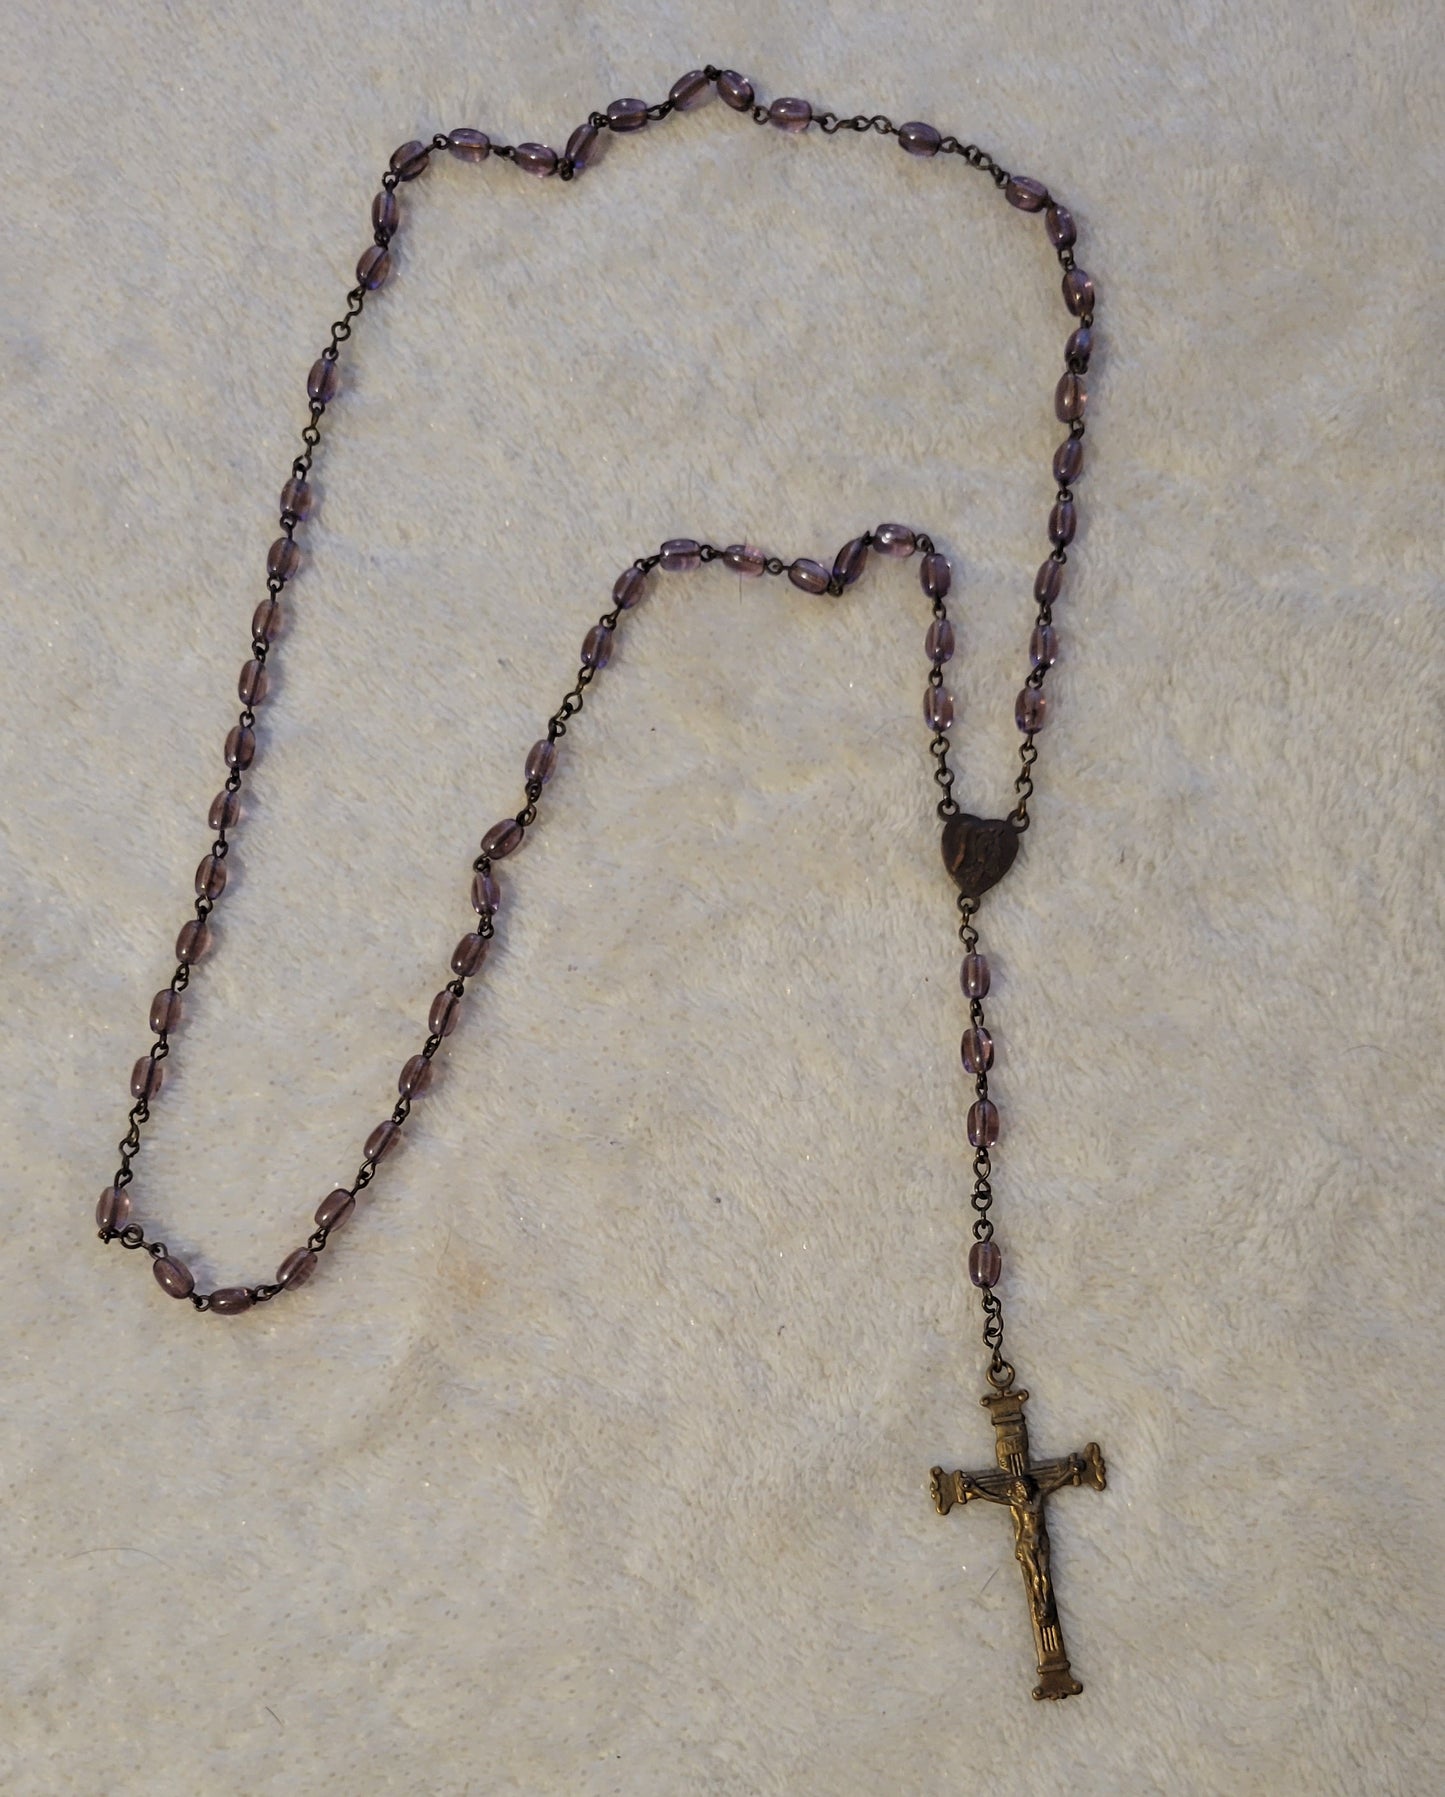 Christian Catholic rosary with crucifix and purple beads. Overall view.